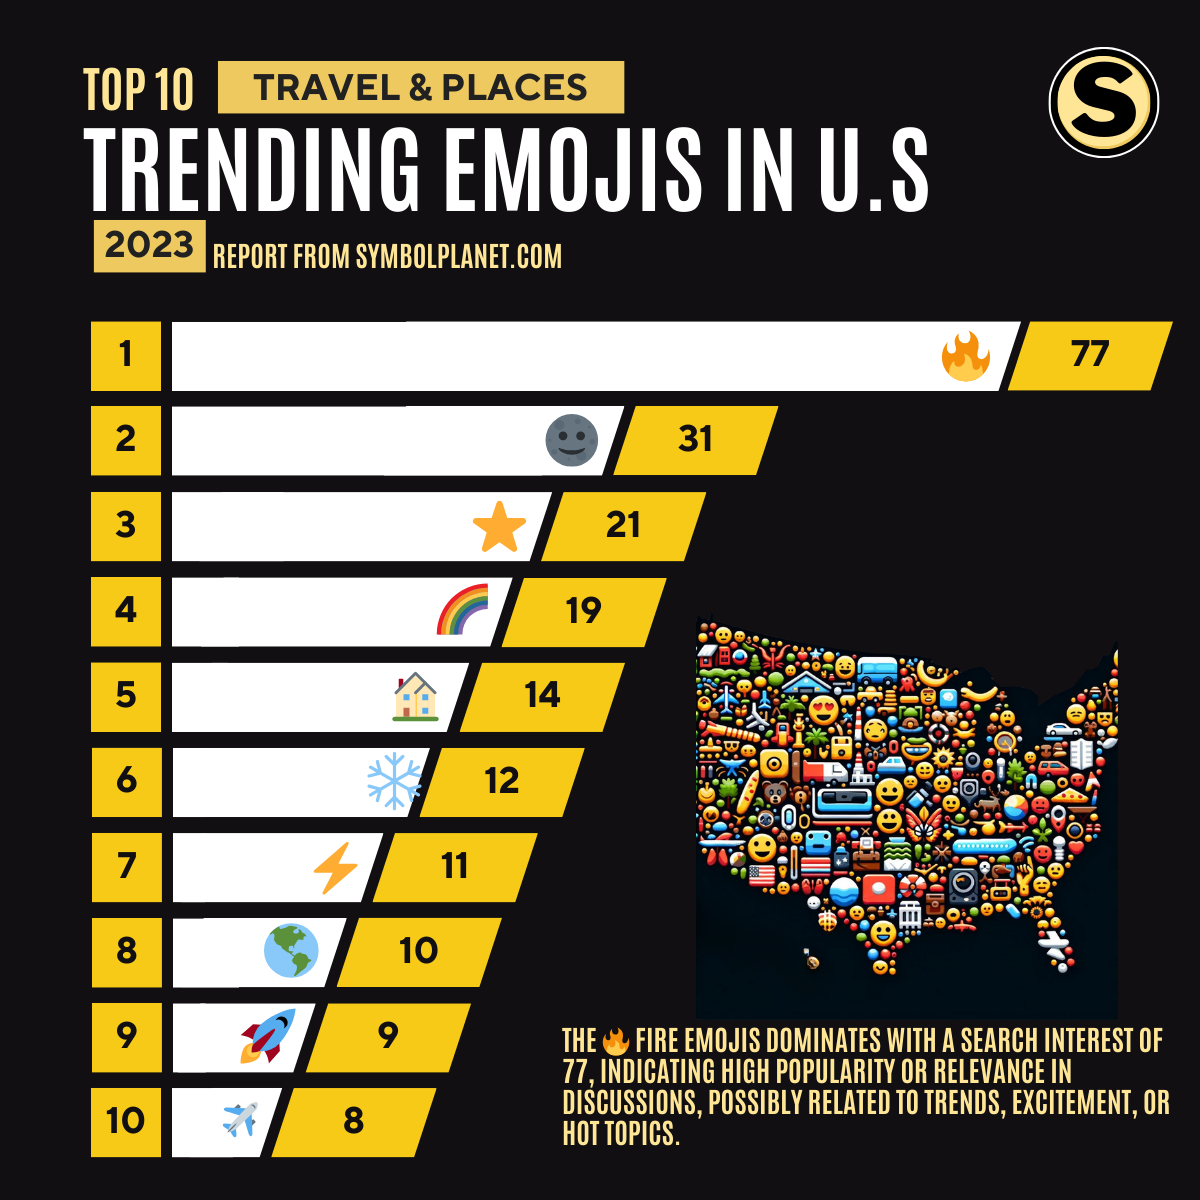 Top 10 Trending (Travel & Places) Emojis of 2023 in the United States